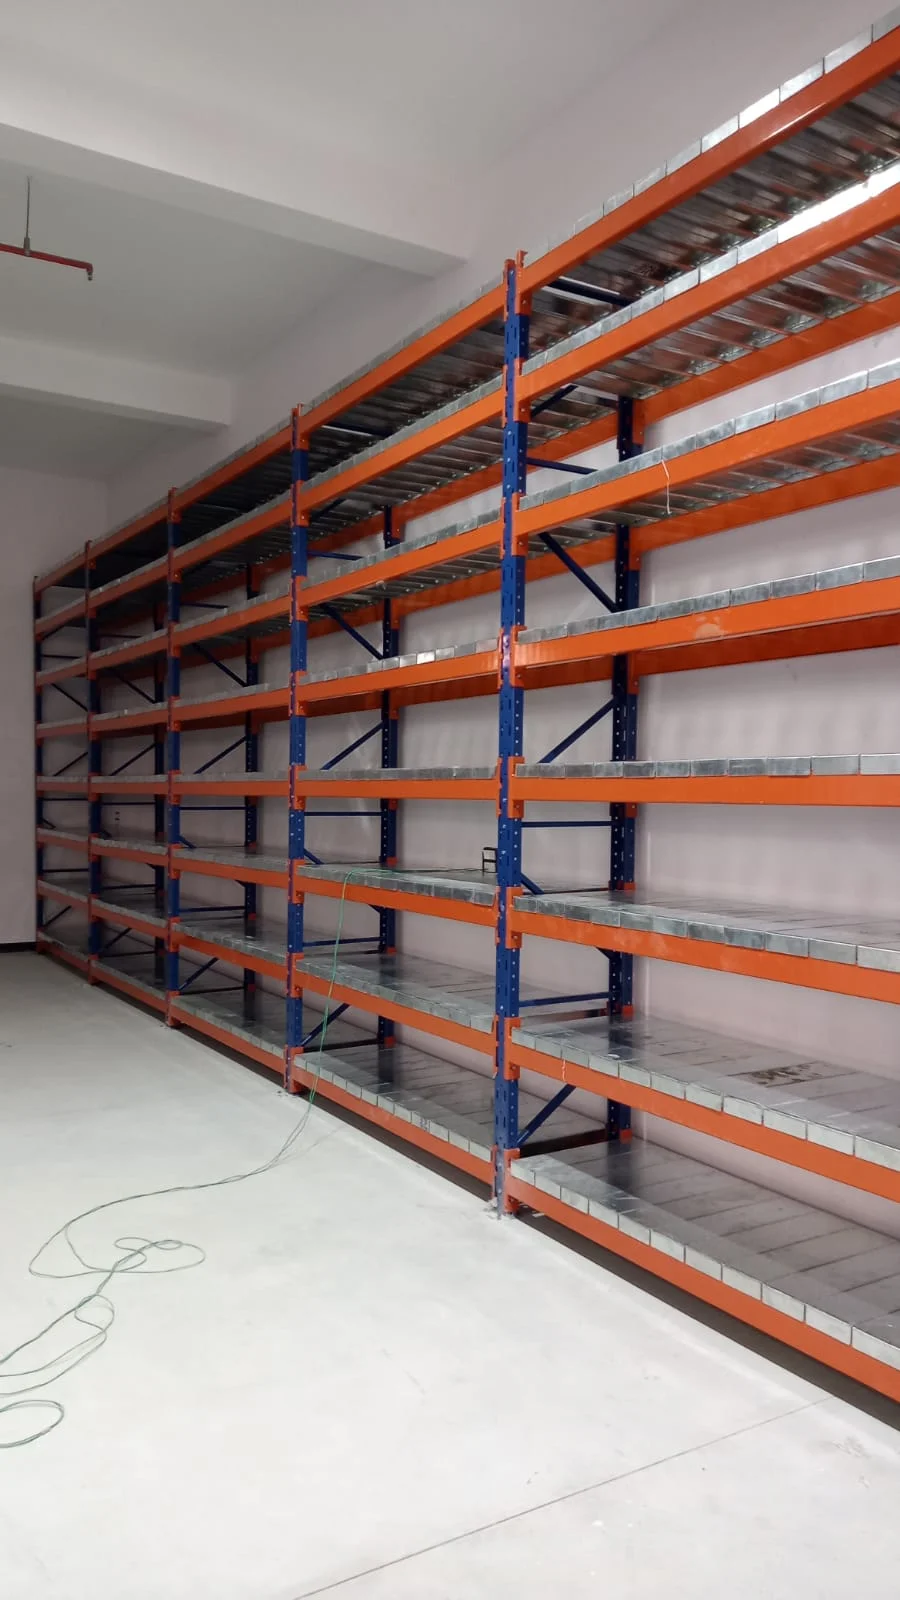 How Pallet Racks Can Help You Store More in Less Space?